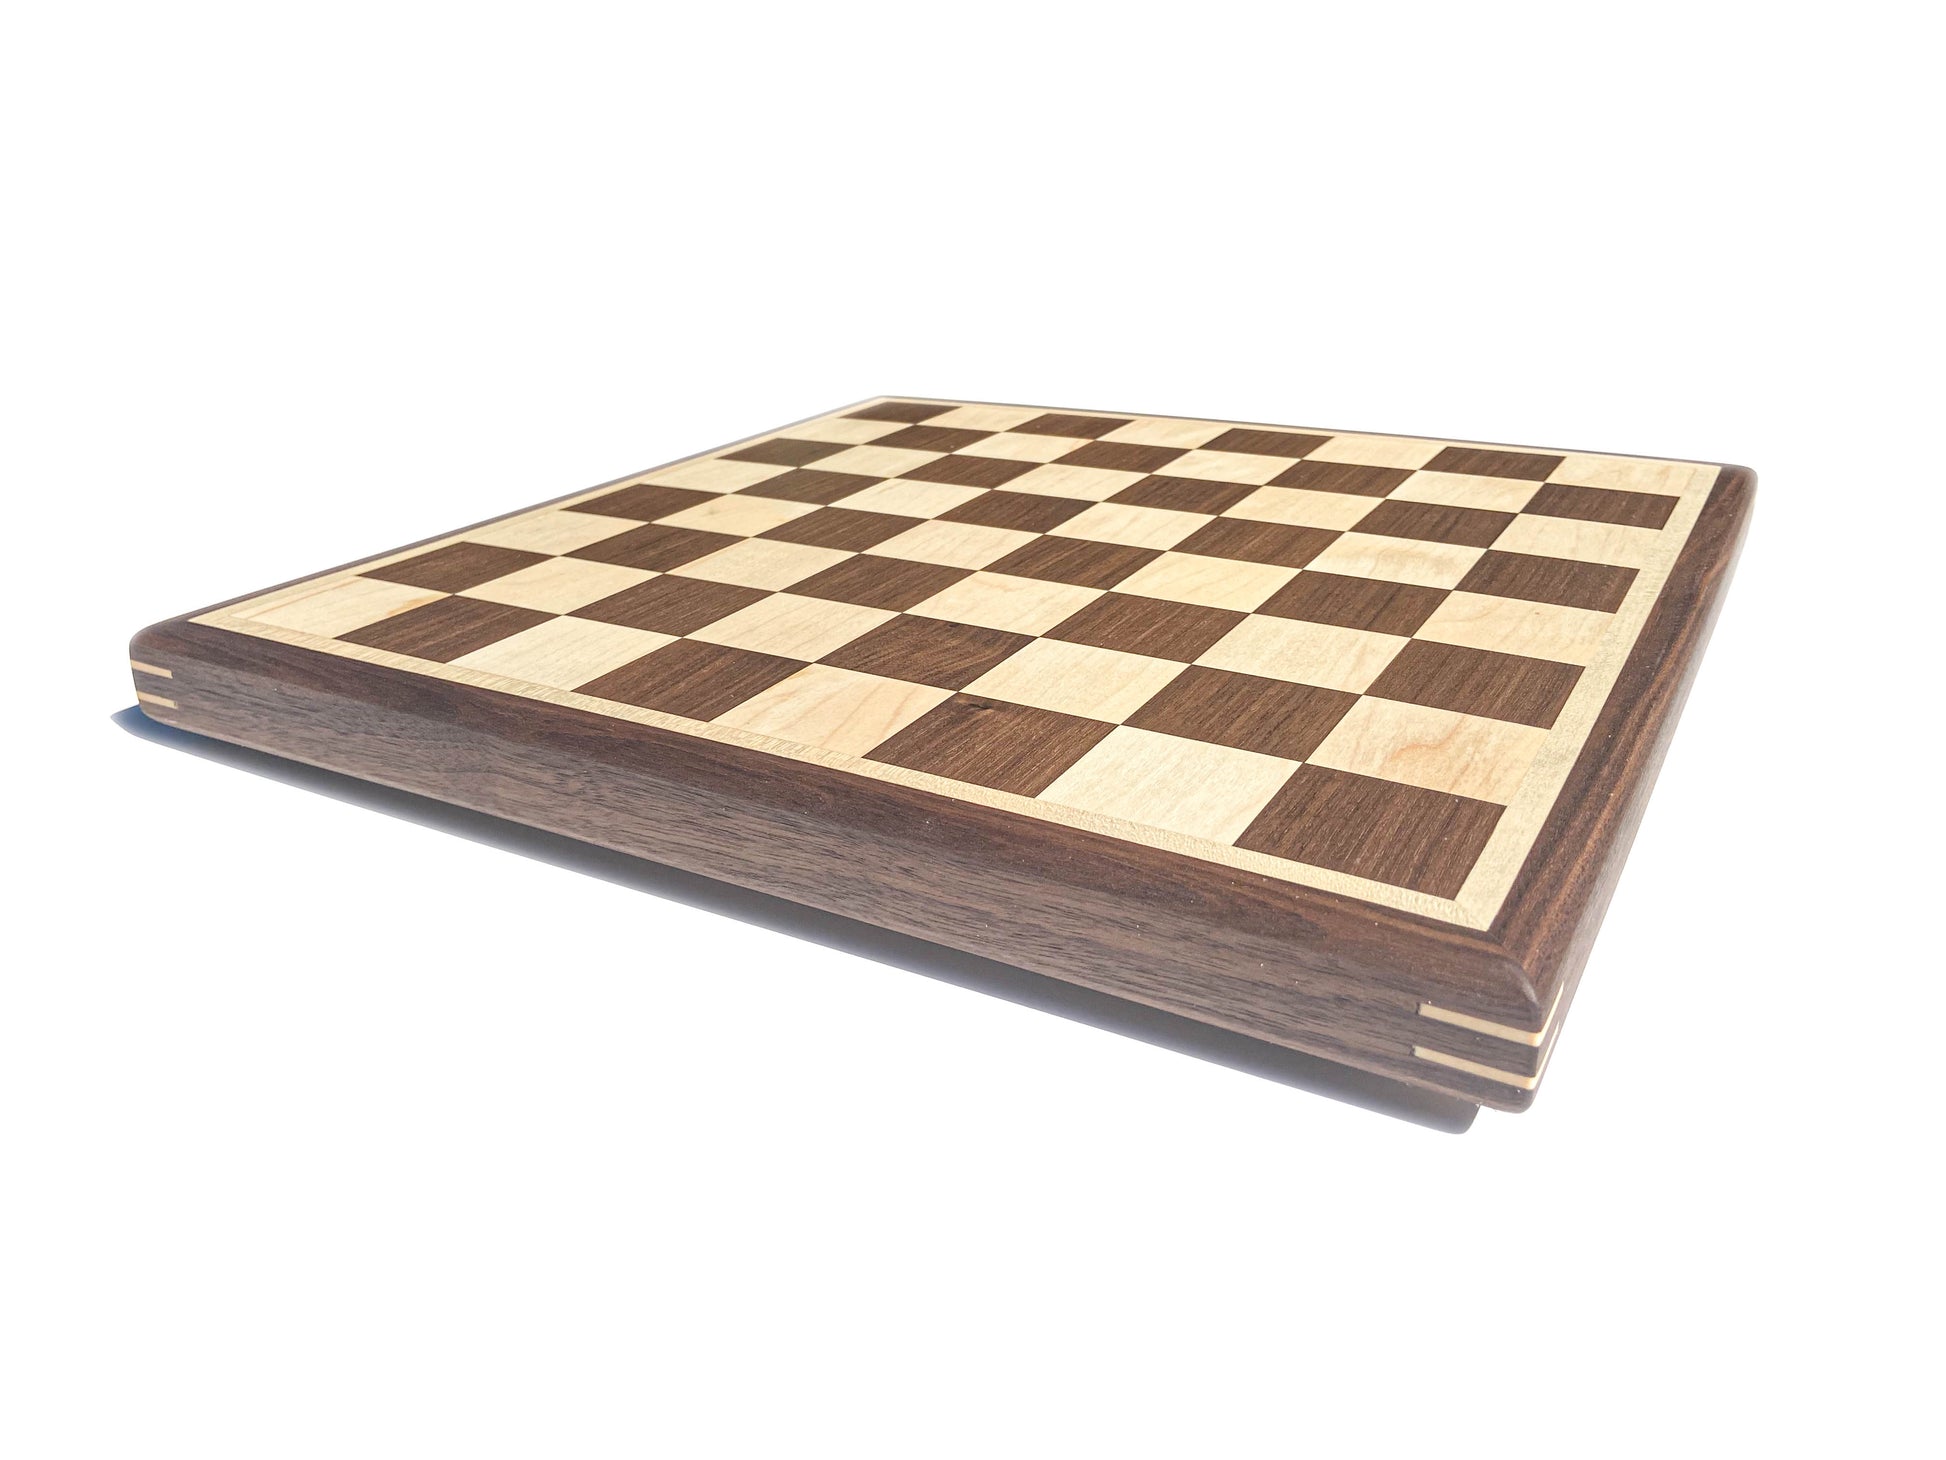 Traditional Hardwood Chess Set - Board and Pieces